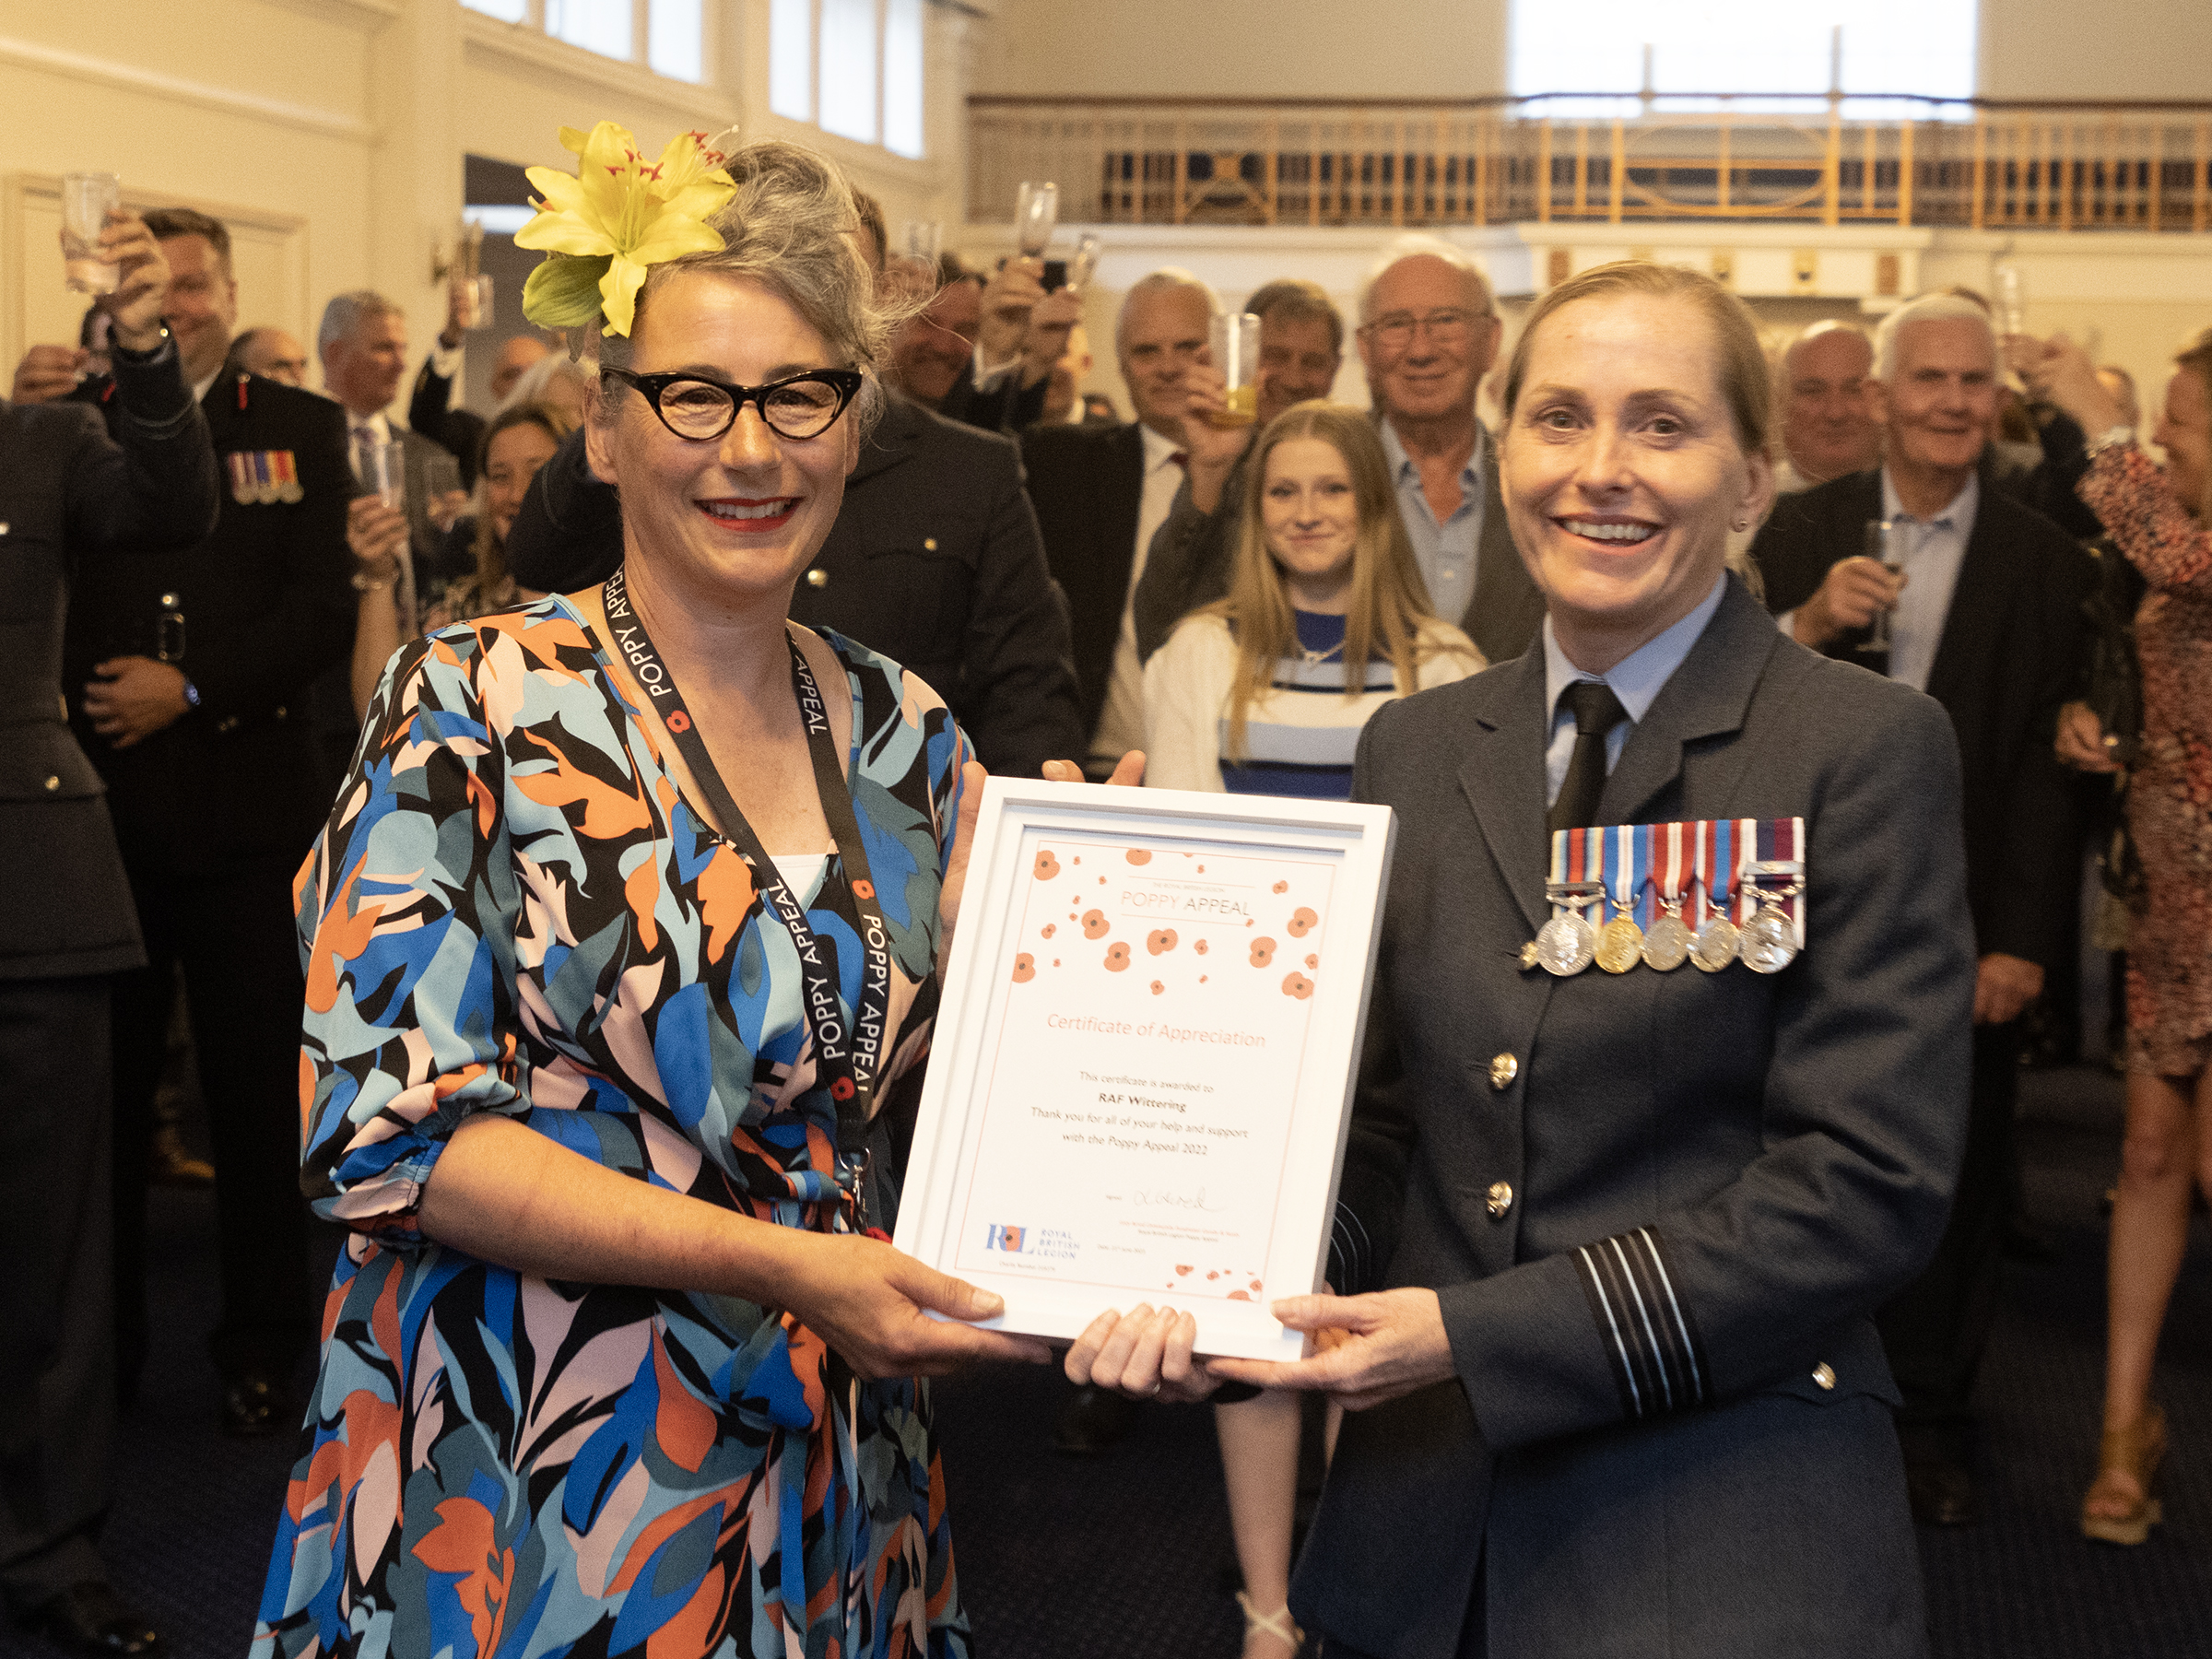 Lucy Acred, of the Royal British Legion, presents Station Commander Wing Commander Nikki Duncan with a Certificate of Appreciation for RAF Wittering